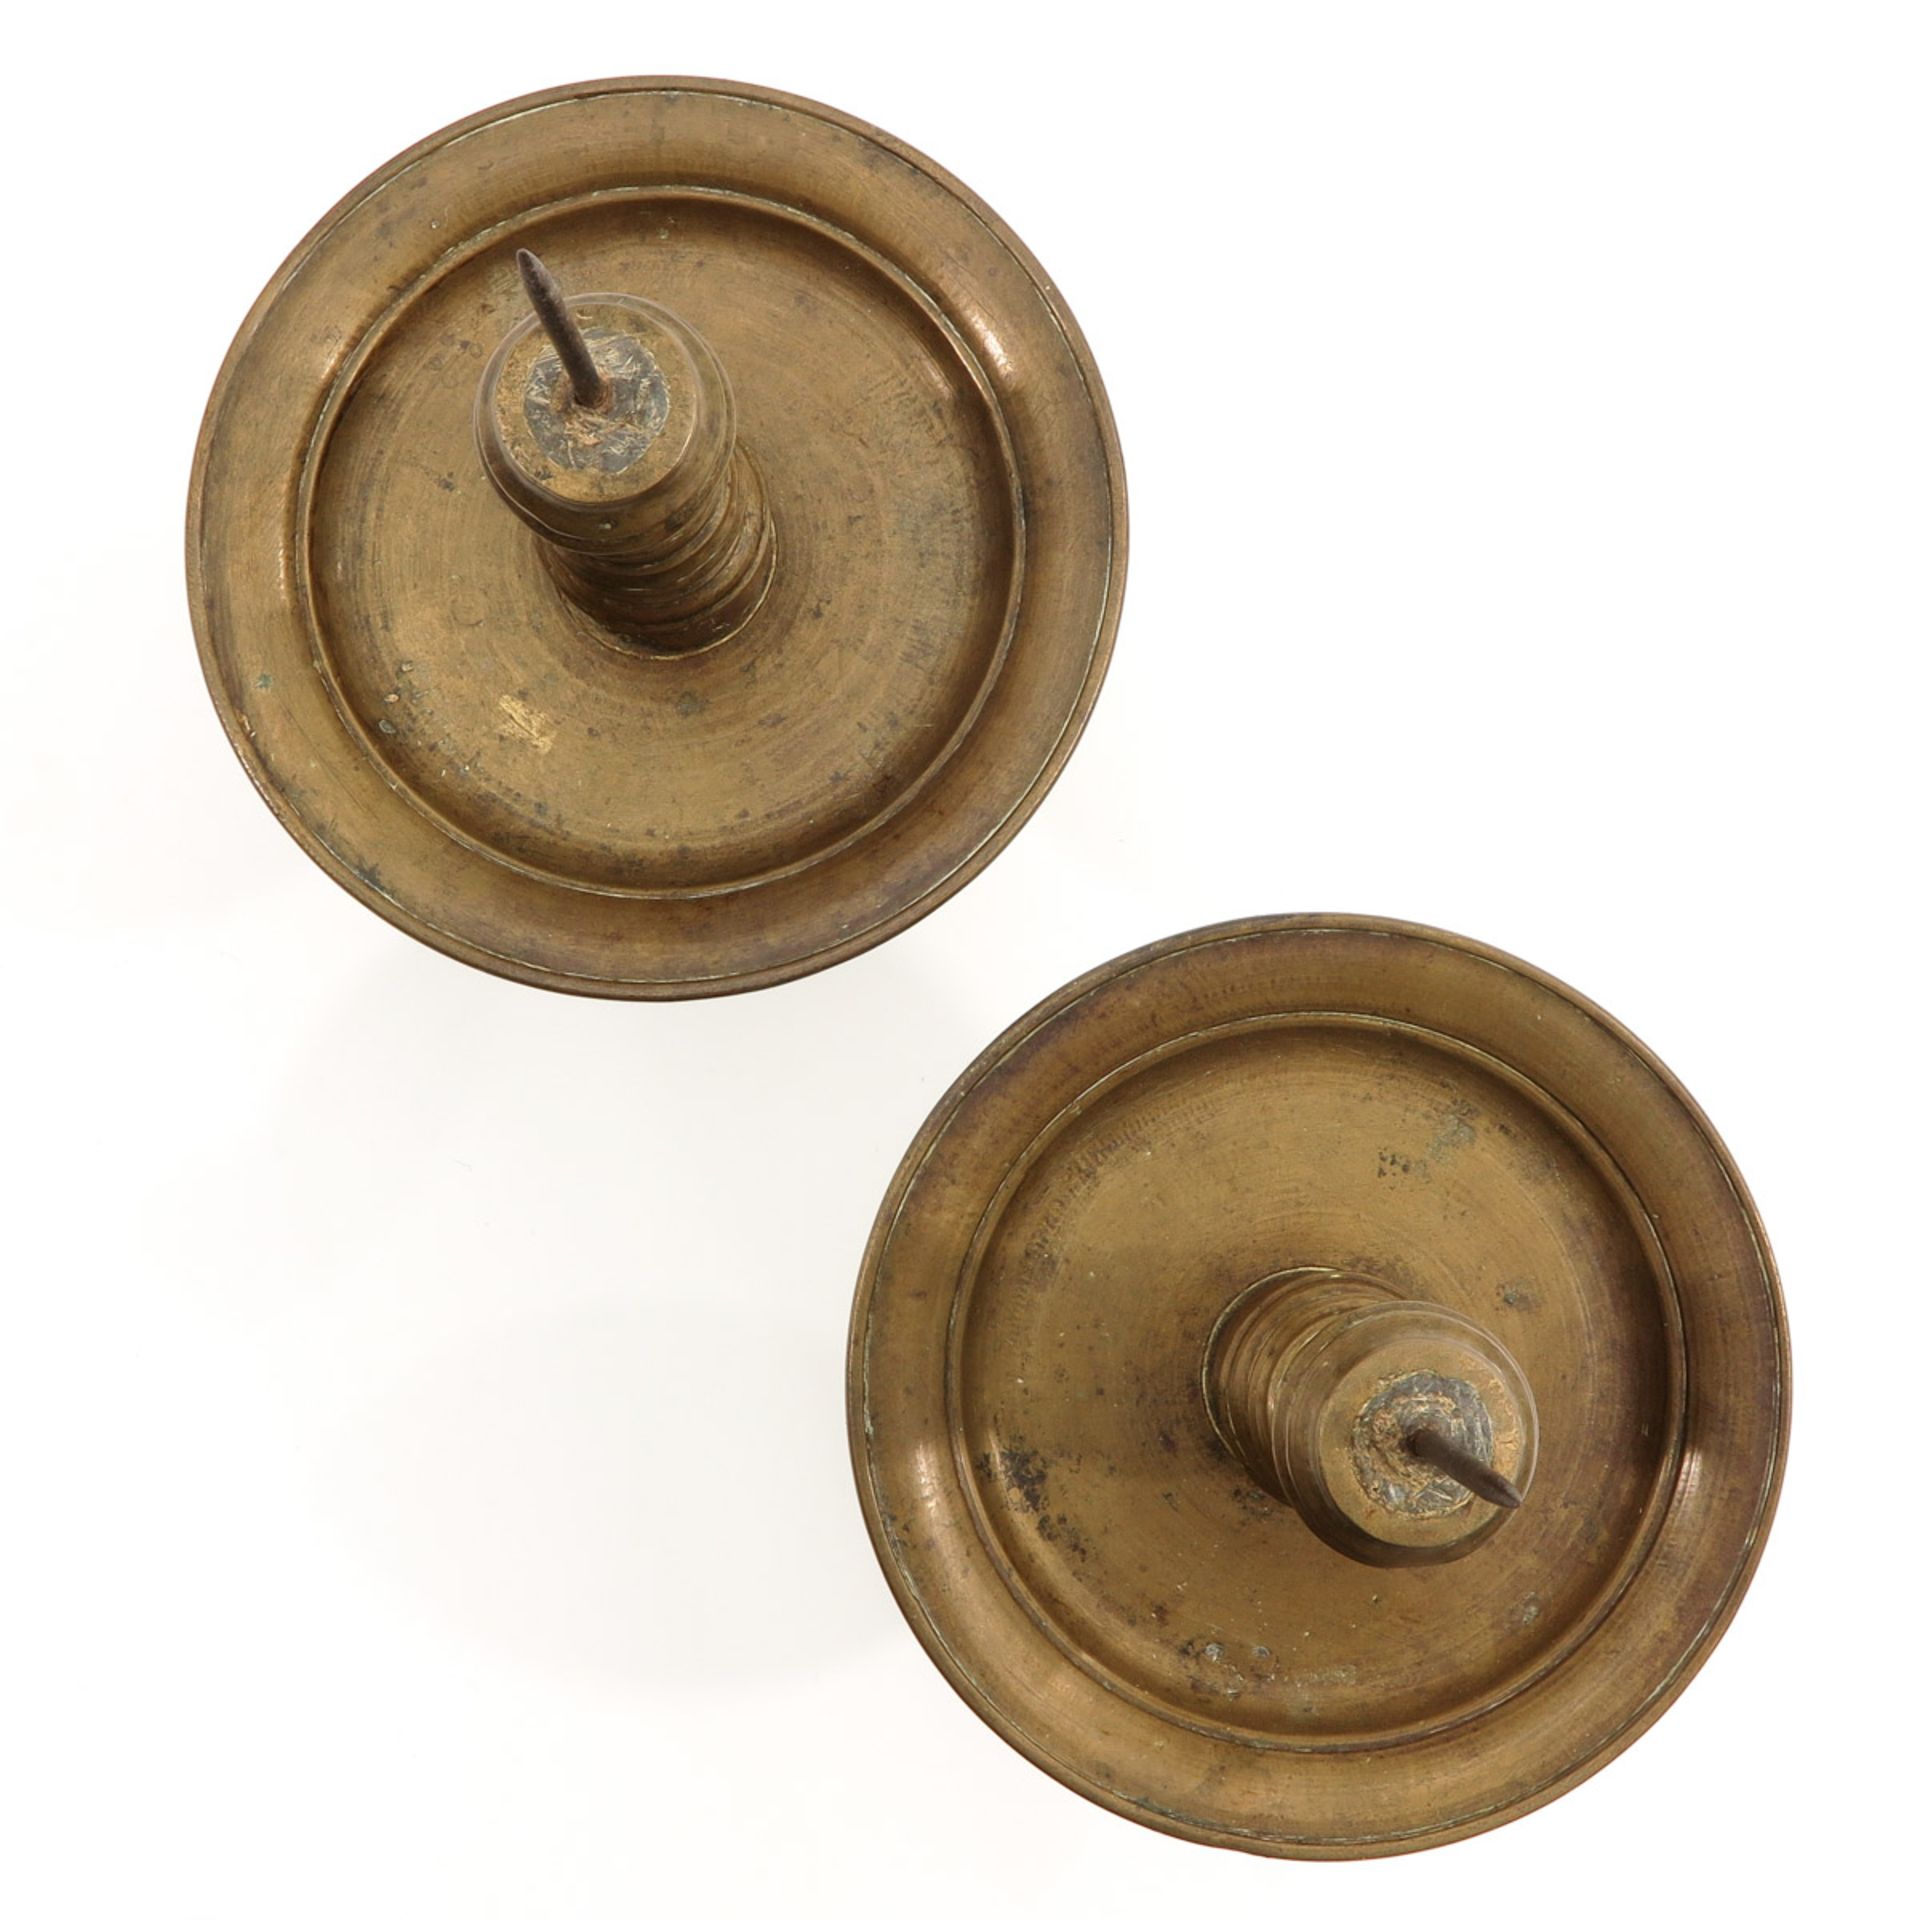 A Pair of Antique Brass Candlesticks - Image 5 of 7